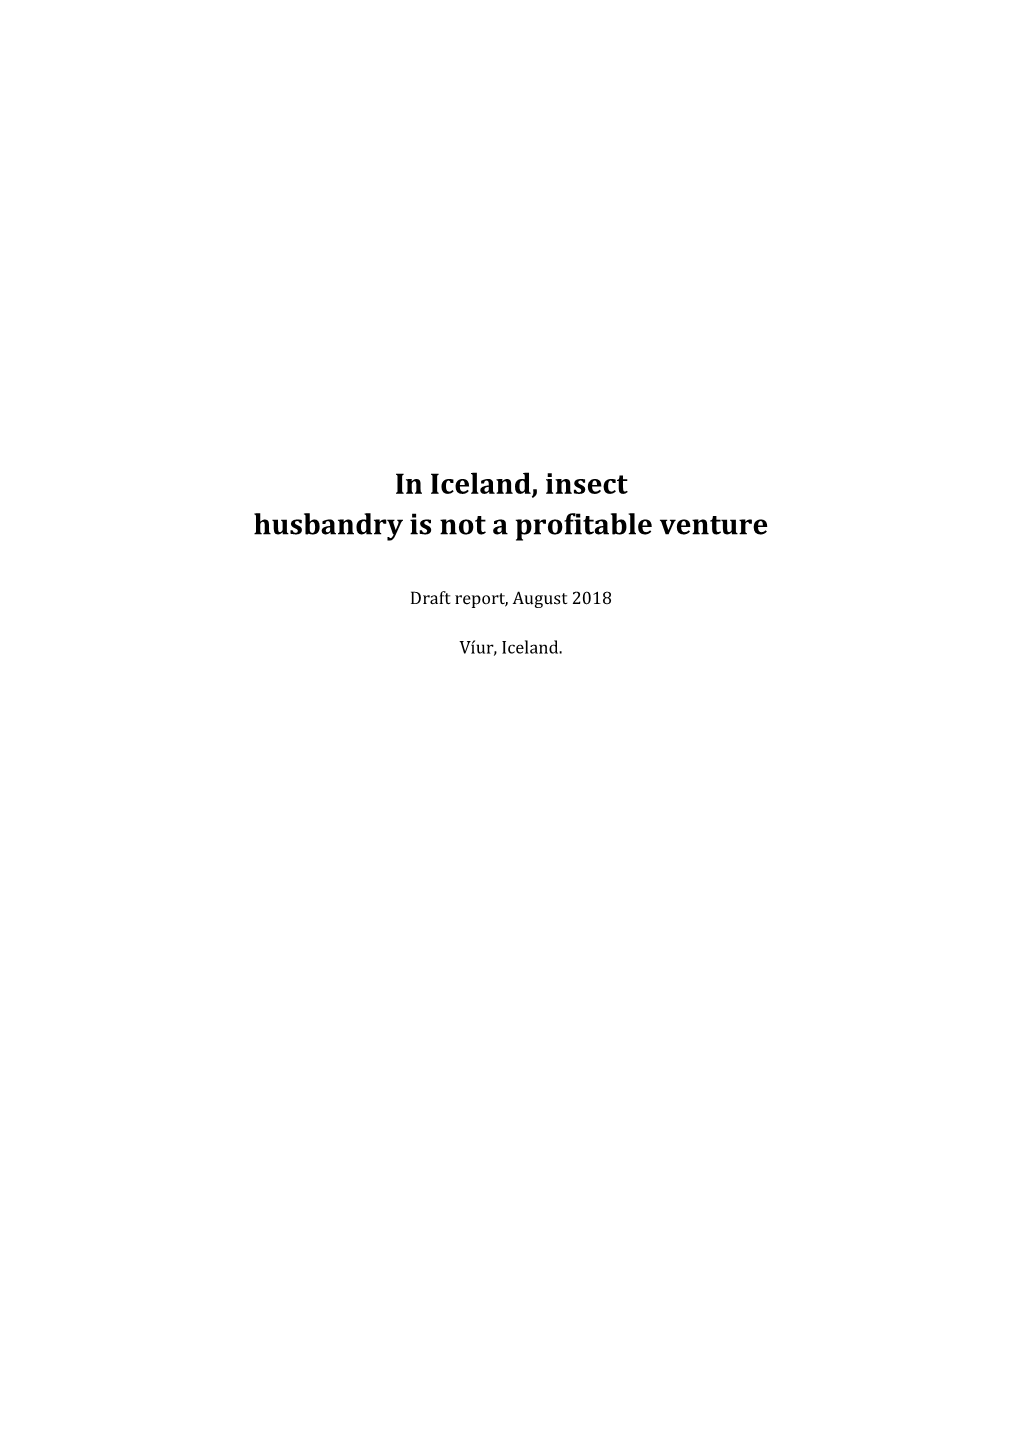 In Iceland, Insect Husbandry Is Not a Profitable Venture